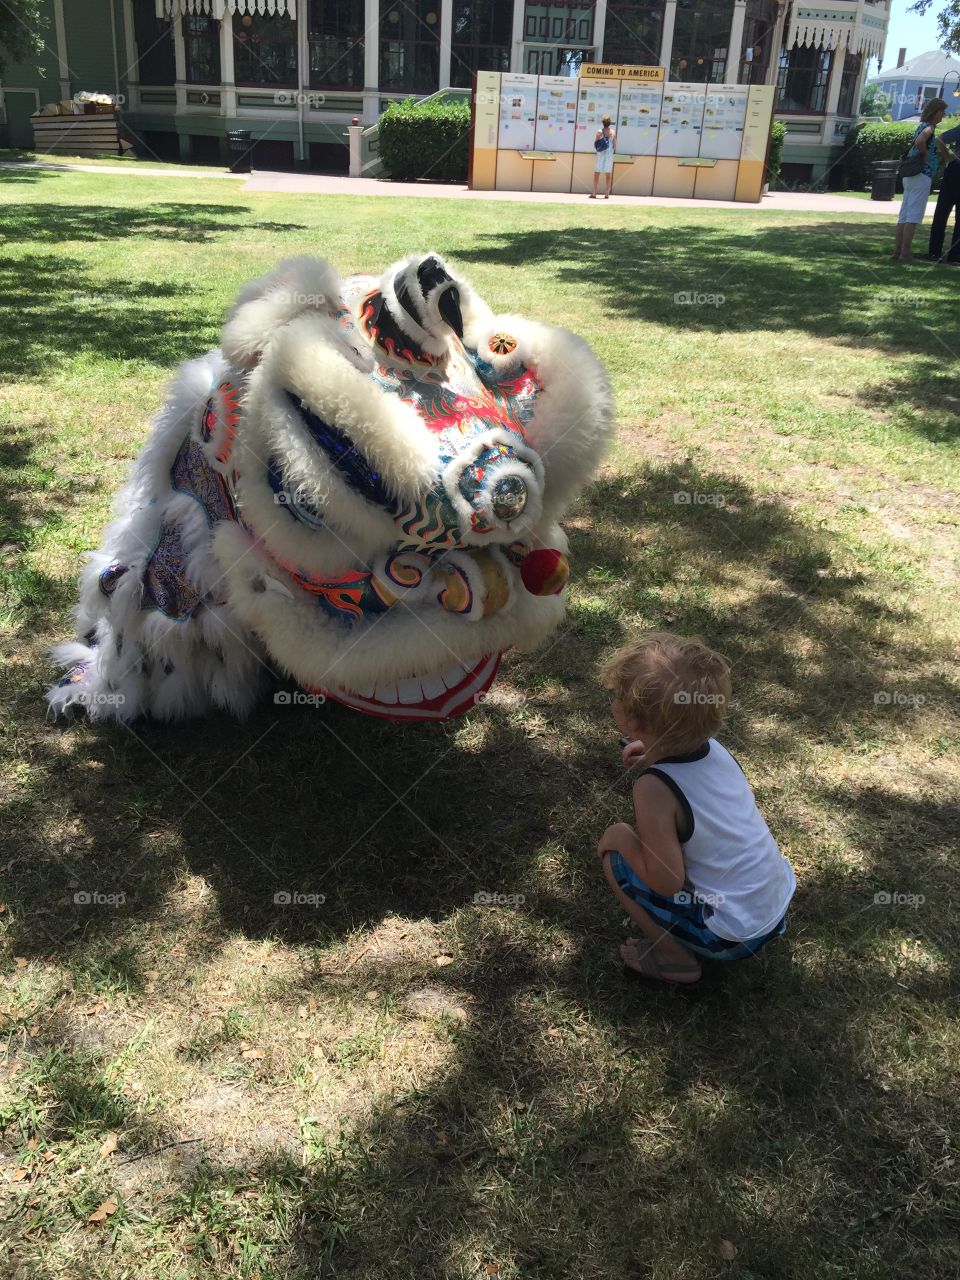 My nephew was fascinated by the Chinese Lions at the Galveston Heritage Festival  